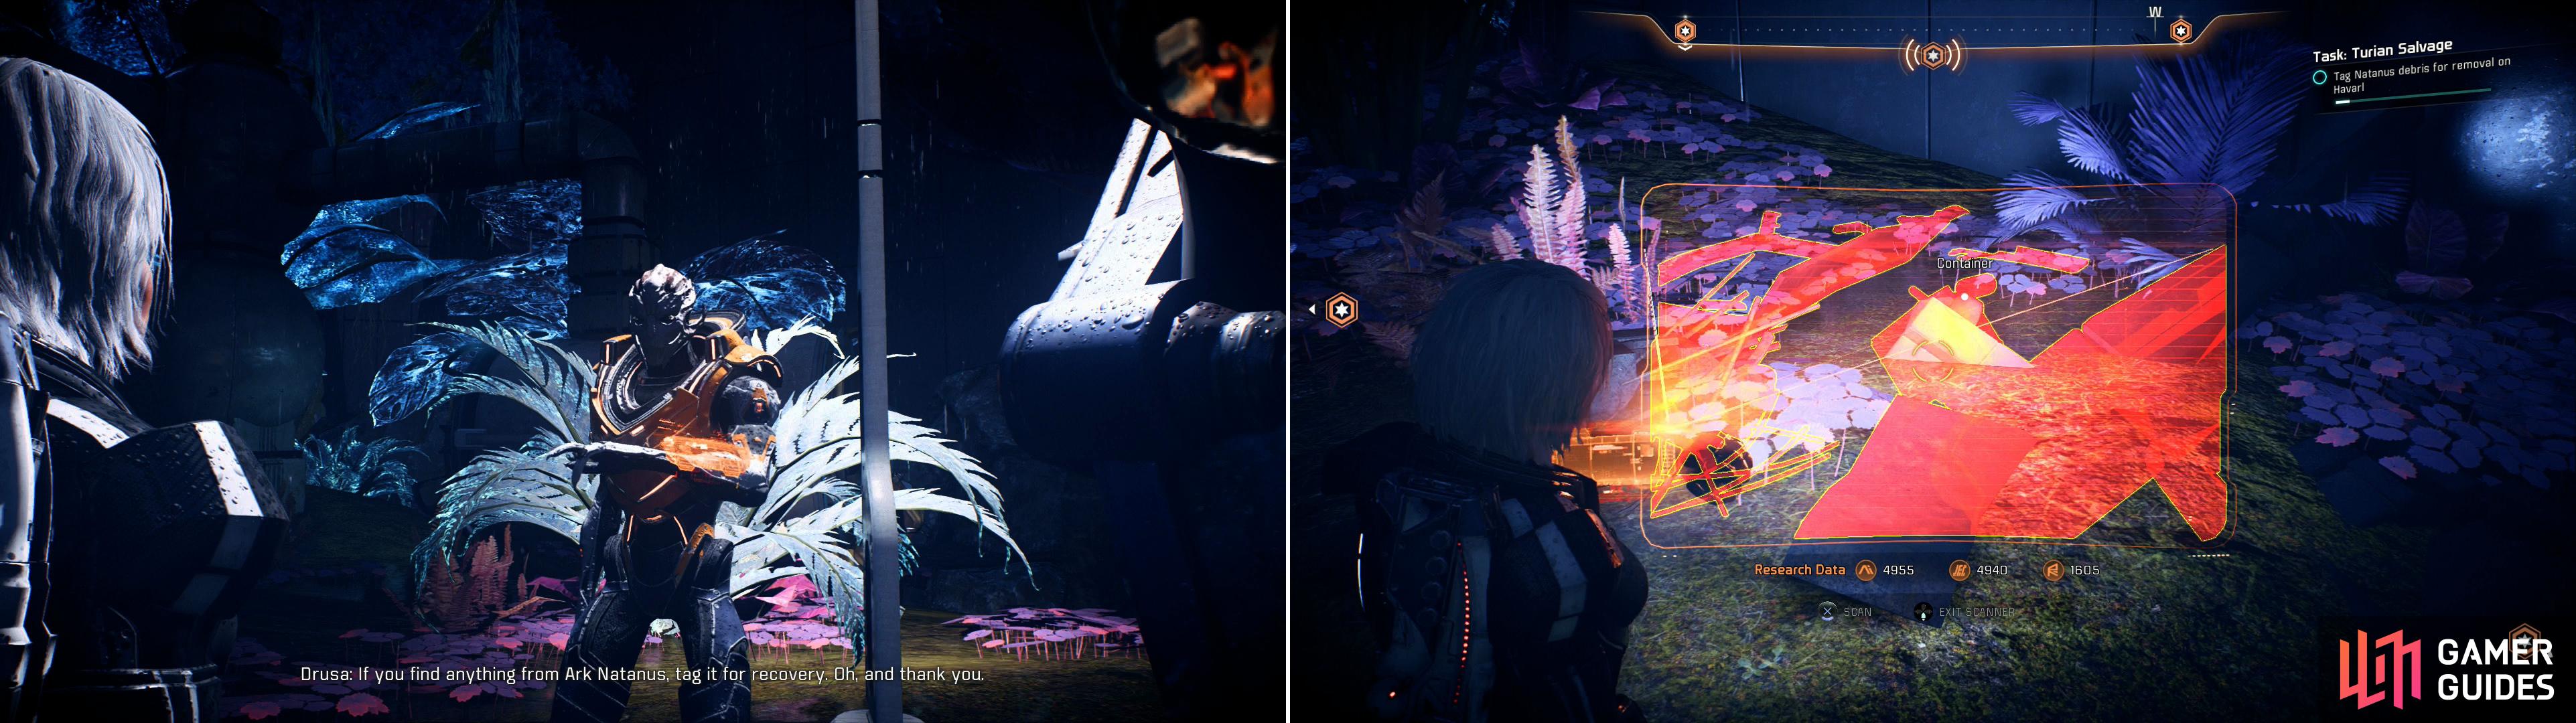 Talk to Drusa at the Turian camp (left) then scour Havarl, moving from navpoint to navpoint in search of debris to scan and loot (right).